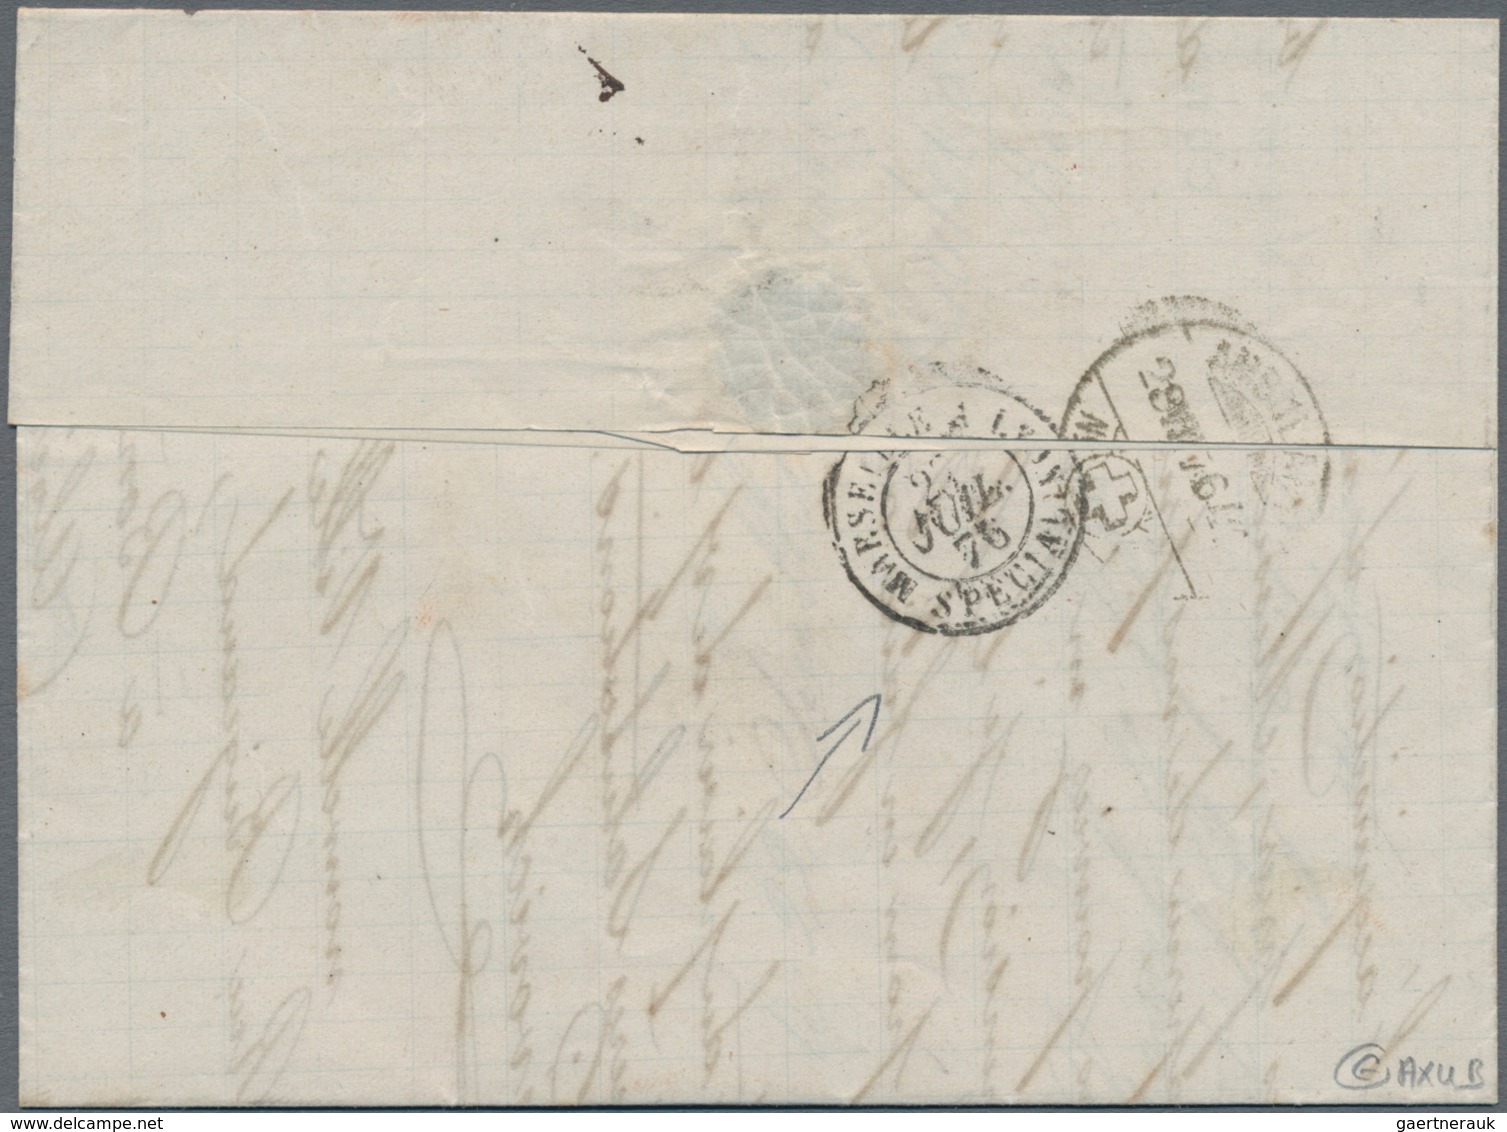 Algerien: 1876, Complete Folded Letter Franked With French Stamp 25 C Blue From BONE To Geneve/Switz - Briefe U. Dokumente